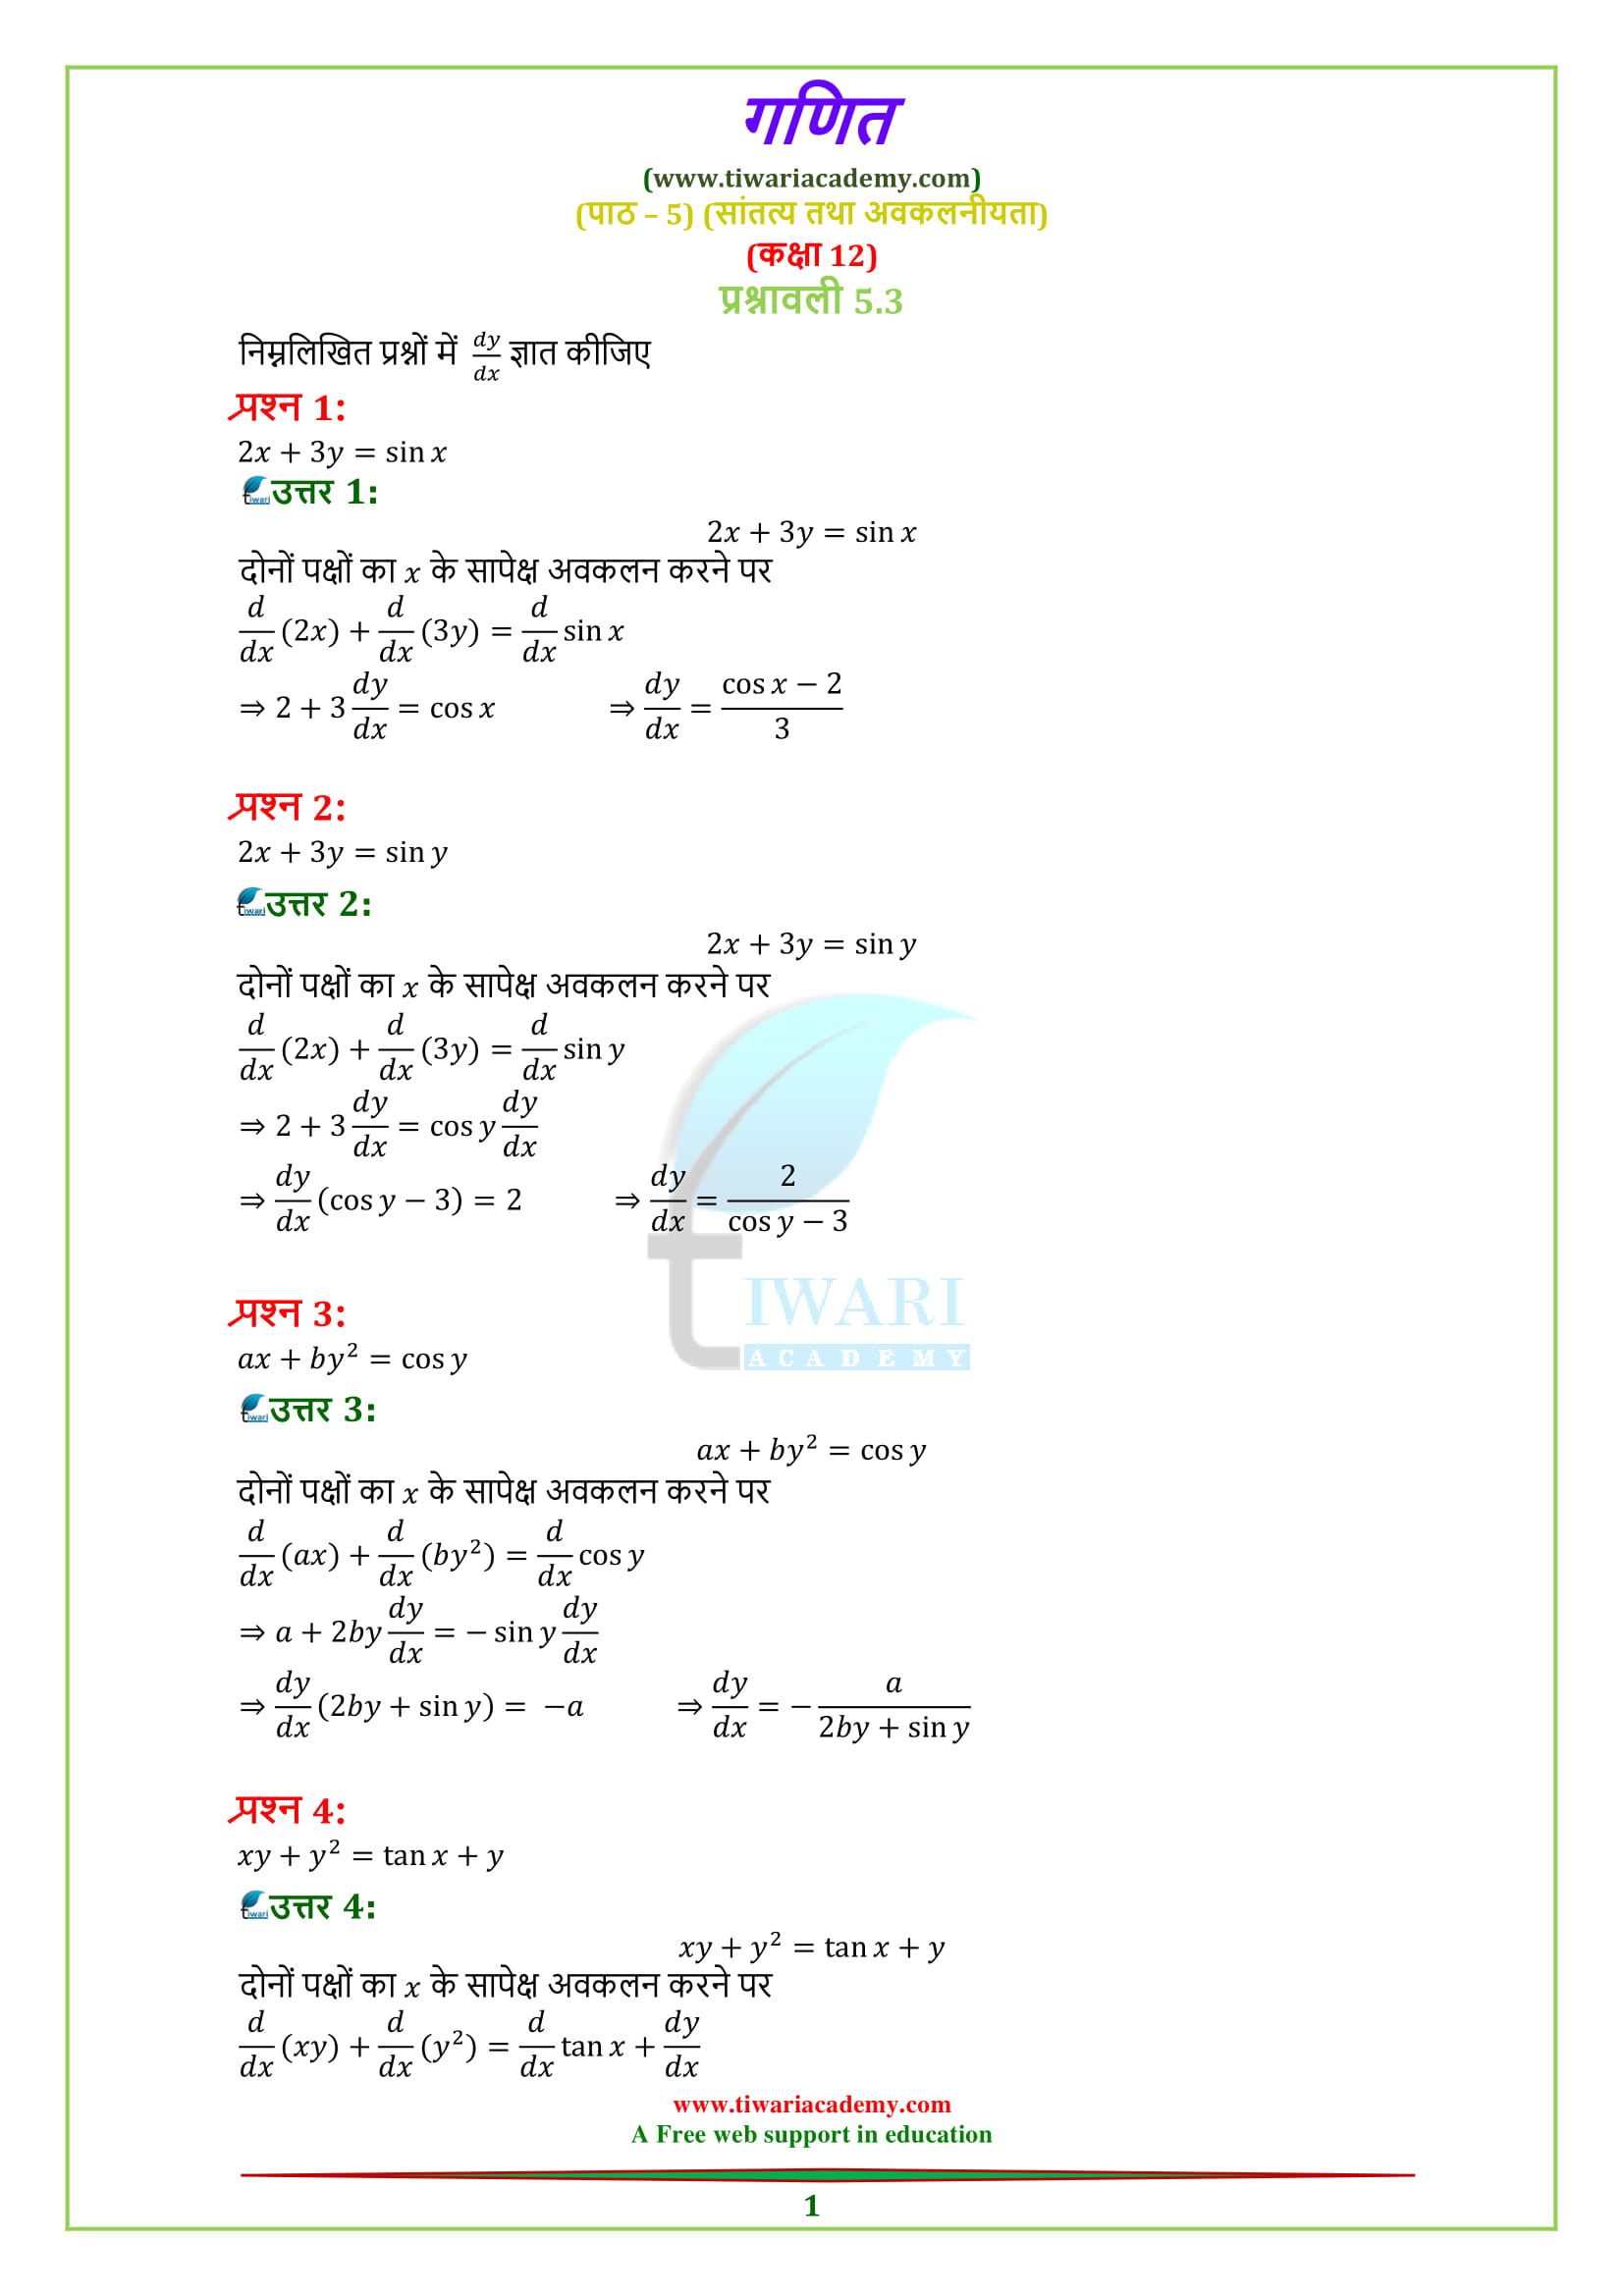 NCERT Solutions for Class 12 Maths Chapter 5 Exercise 5.3 in Hindi Medium